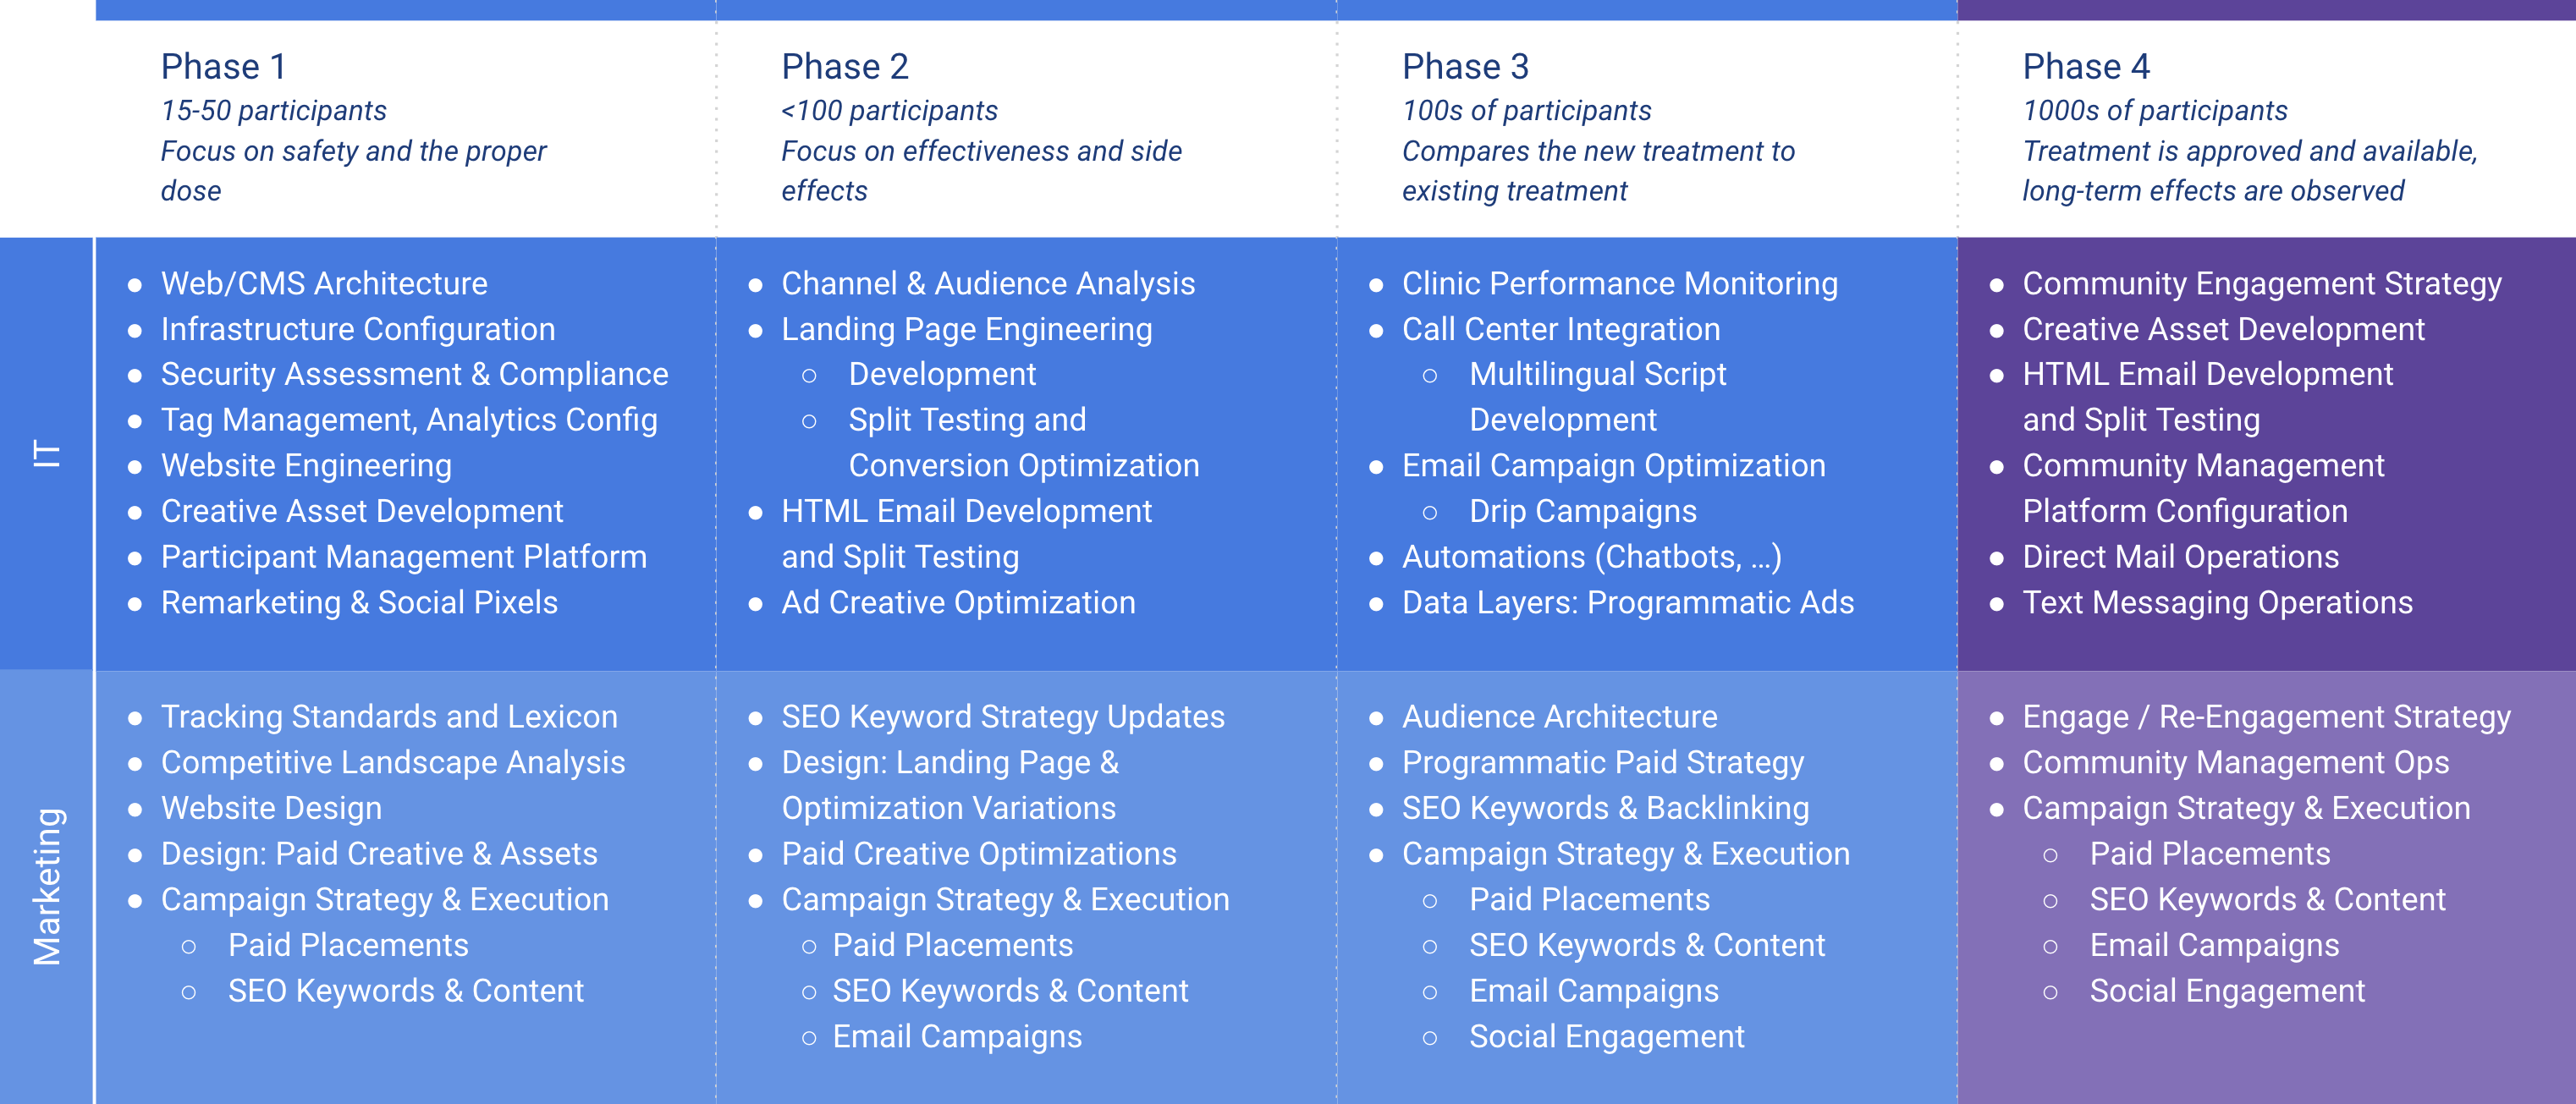 Clinical Trial Phases with IT and Marketing Activity